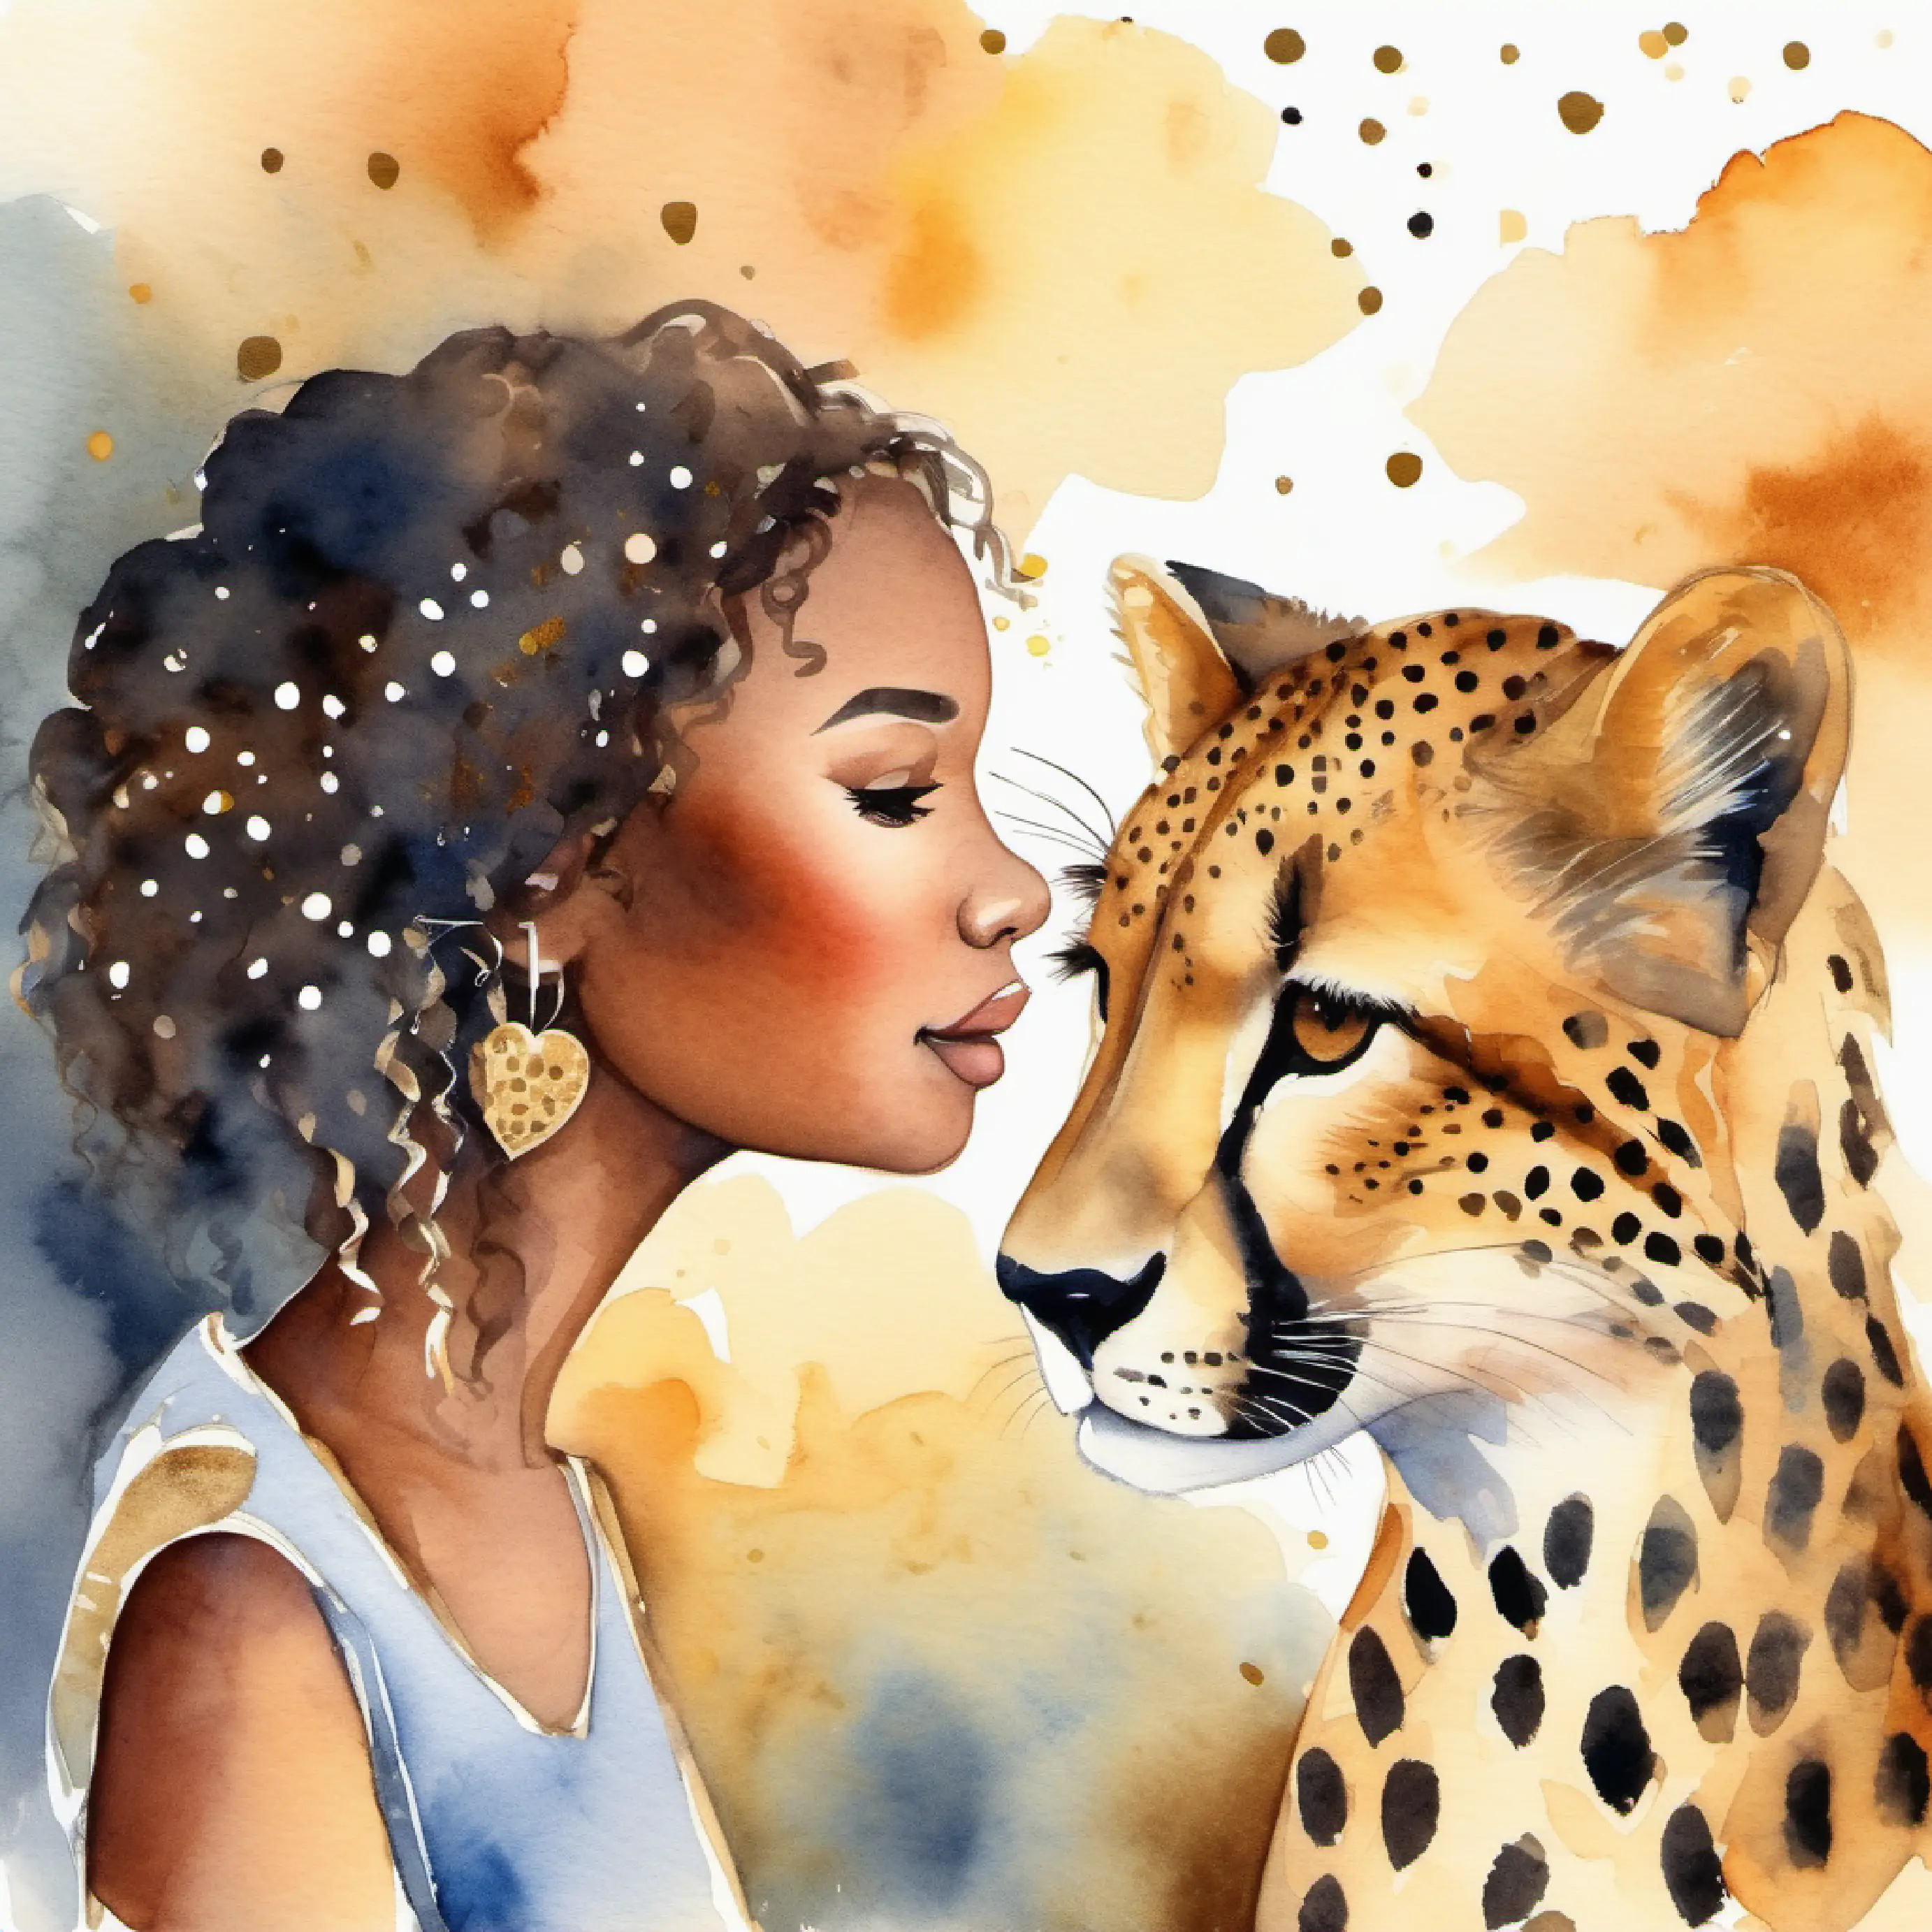 The heartfelt goodbye between Kind girl, cheerful, with sparkling brown eyes and brown skin and Spotted cheetah, agile, with alert golden eyes.